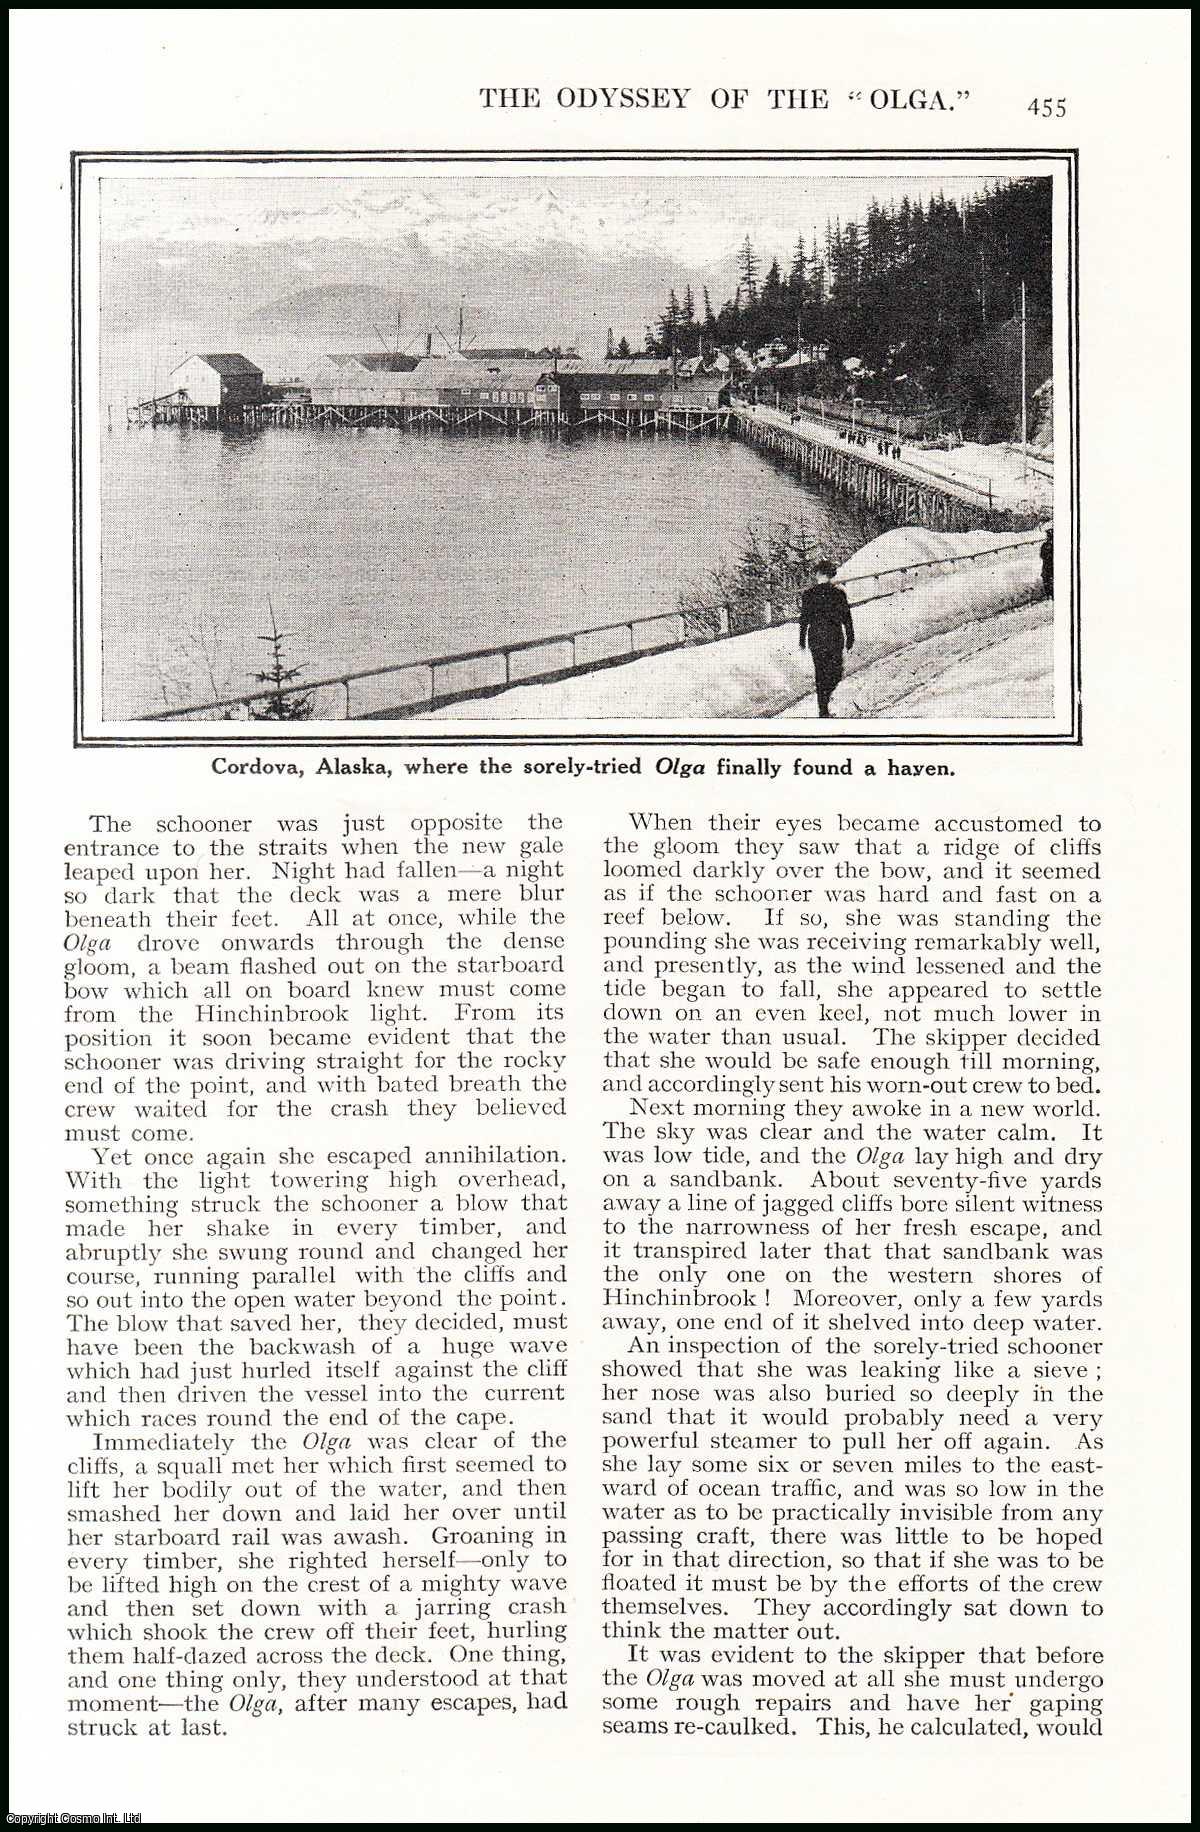 John Rawson of Anchorage, Alaska. Illustrated by W.G. York. - The Odyssey of the Olga : leaving Nome, Alaska, for Seattle, Washington, the little schooner Olga disappeared from human ken for over was supposed that the winter storms of the treacherous Bering Sea had overwhelmed her. An uncommon original article from the Wide World Magazine, 1925.